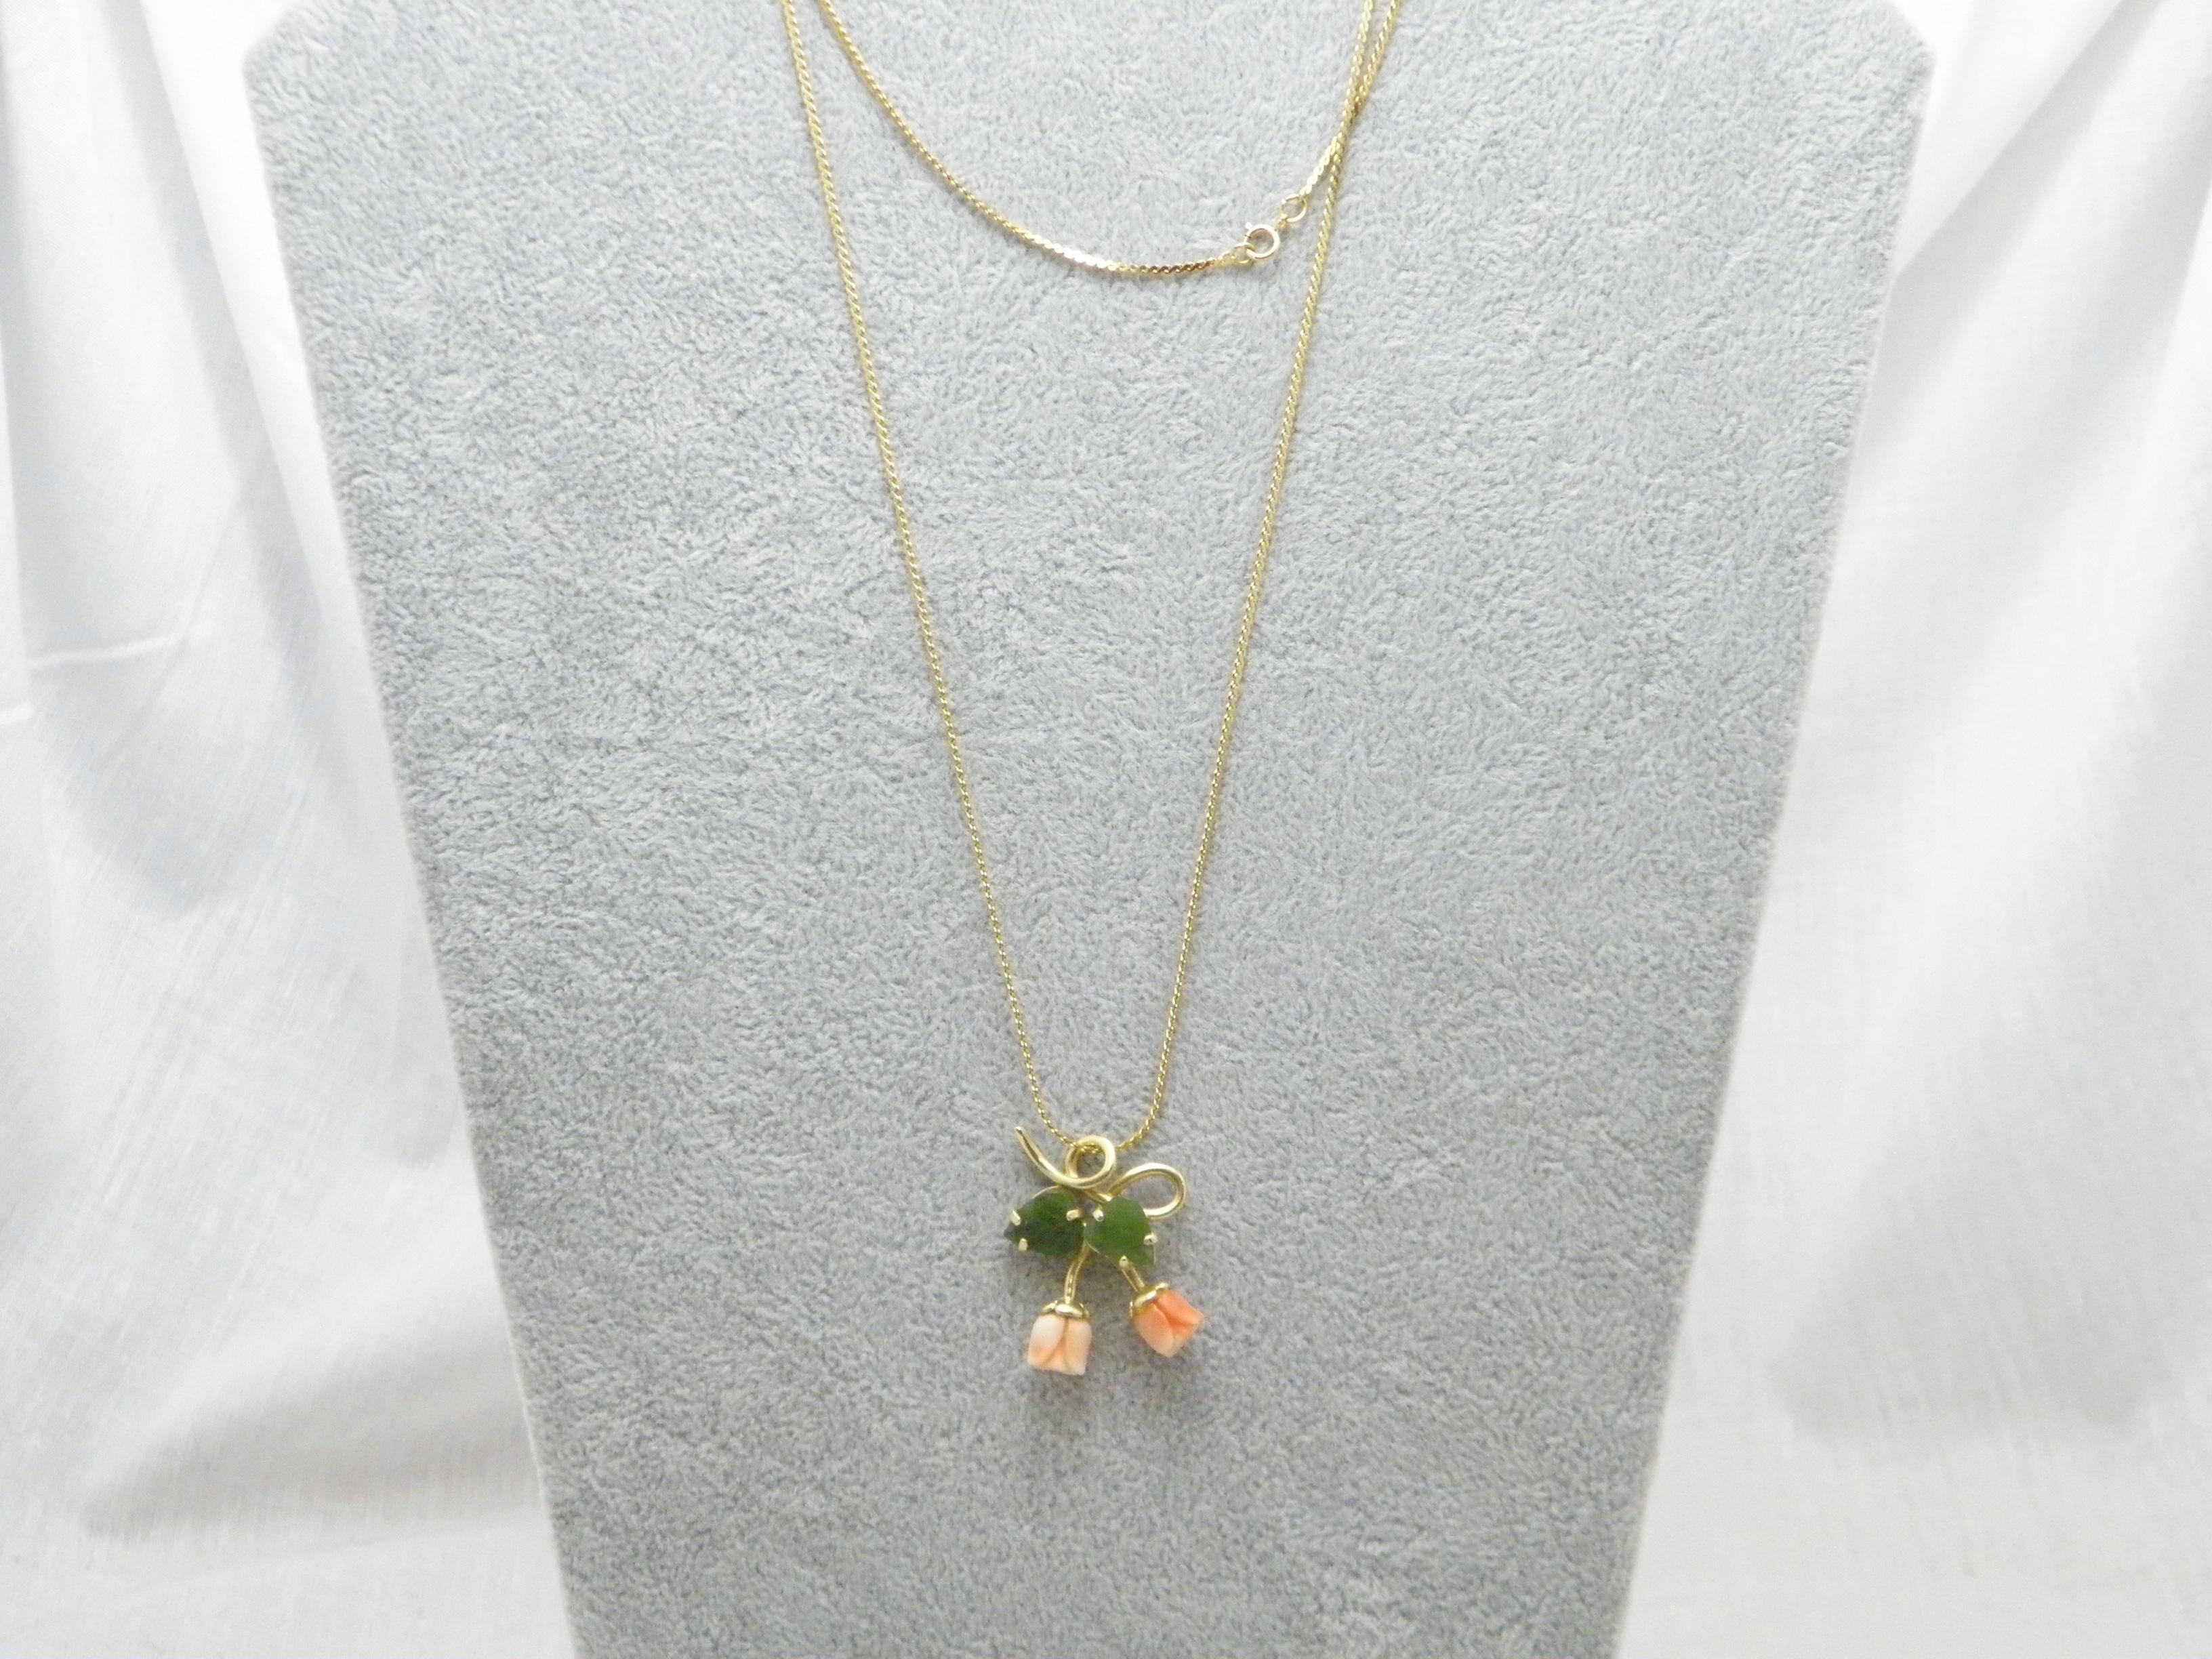 Antique 14ct Gold Jade Coral Roses Pendant Necklace Byzantine Chain 585 28 Inch For Sale 1